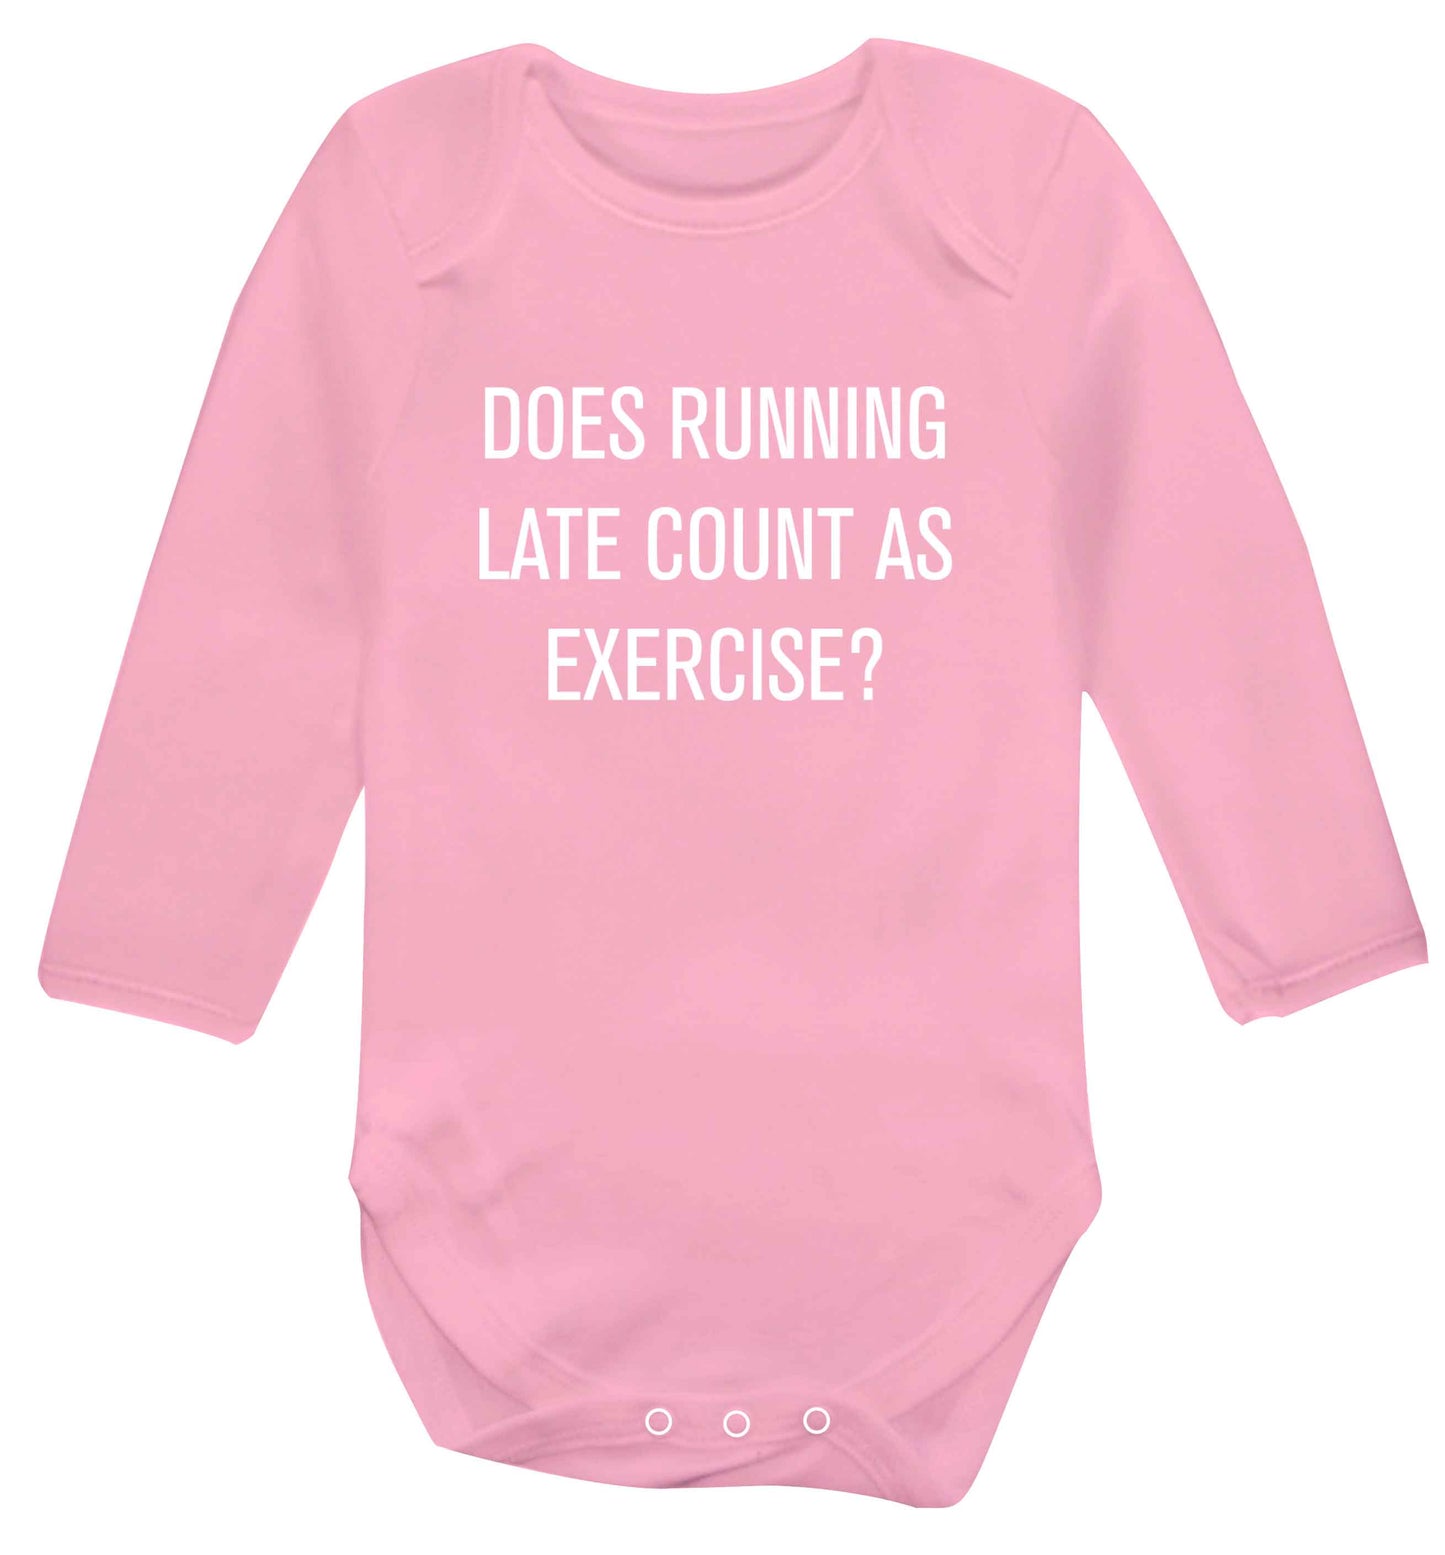 Does running late count as exercise? baby vest long sleeved pale pink 6-12 months